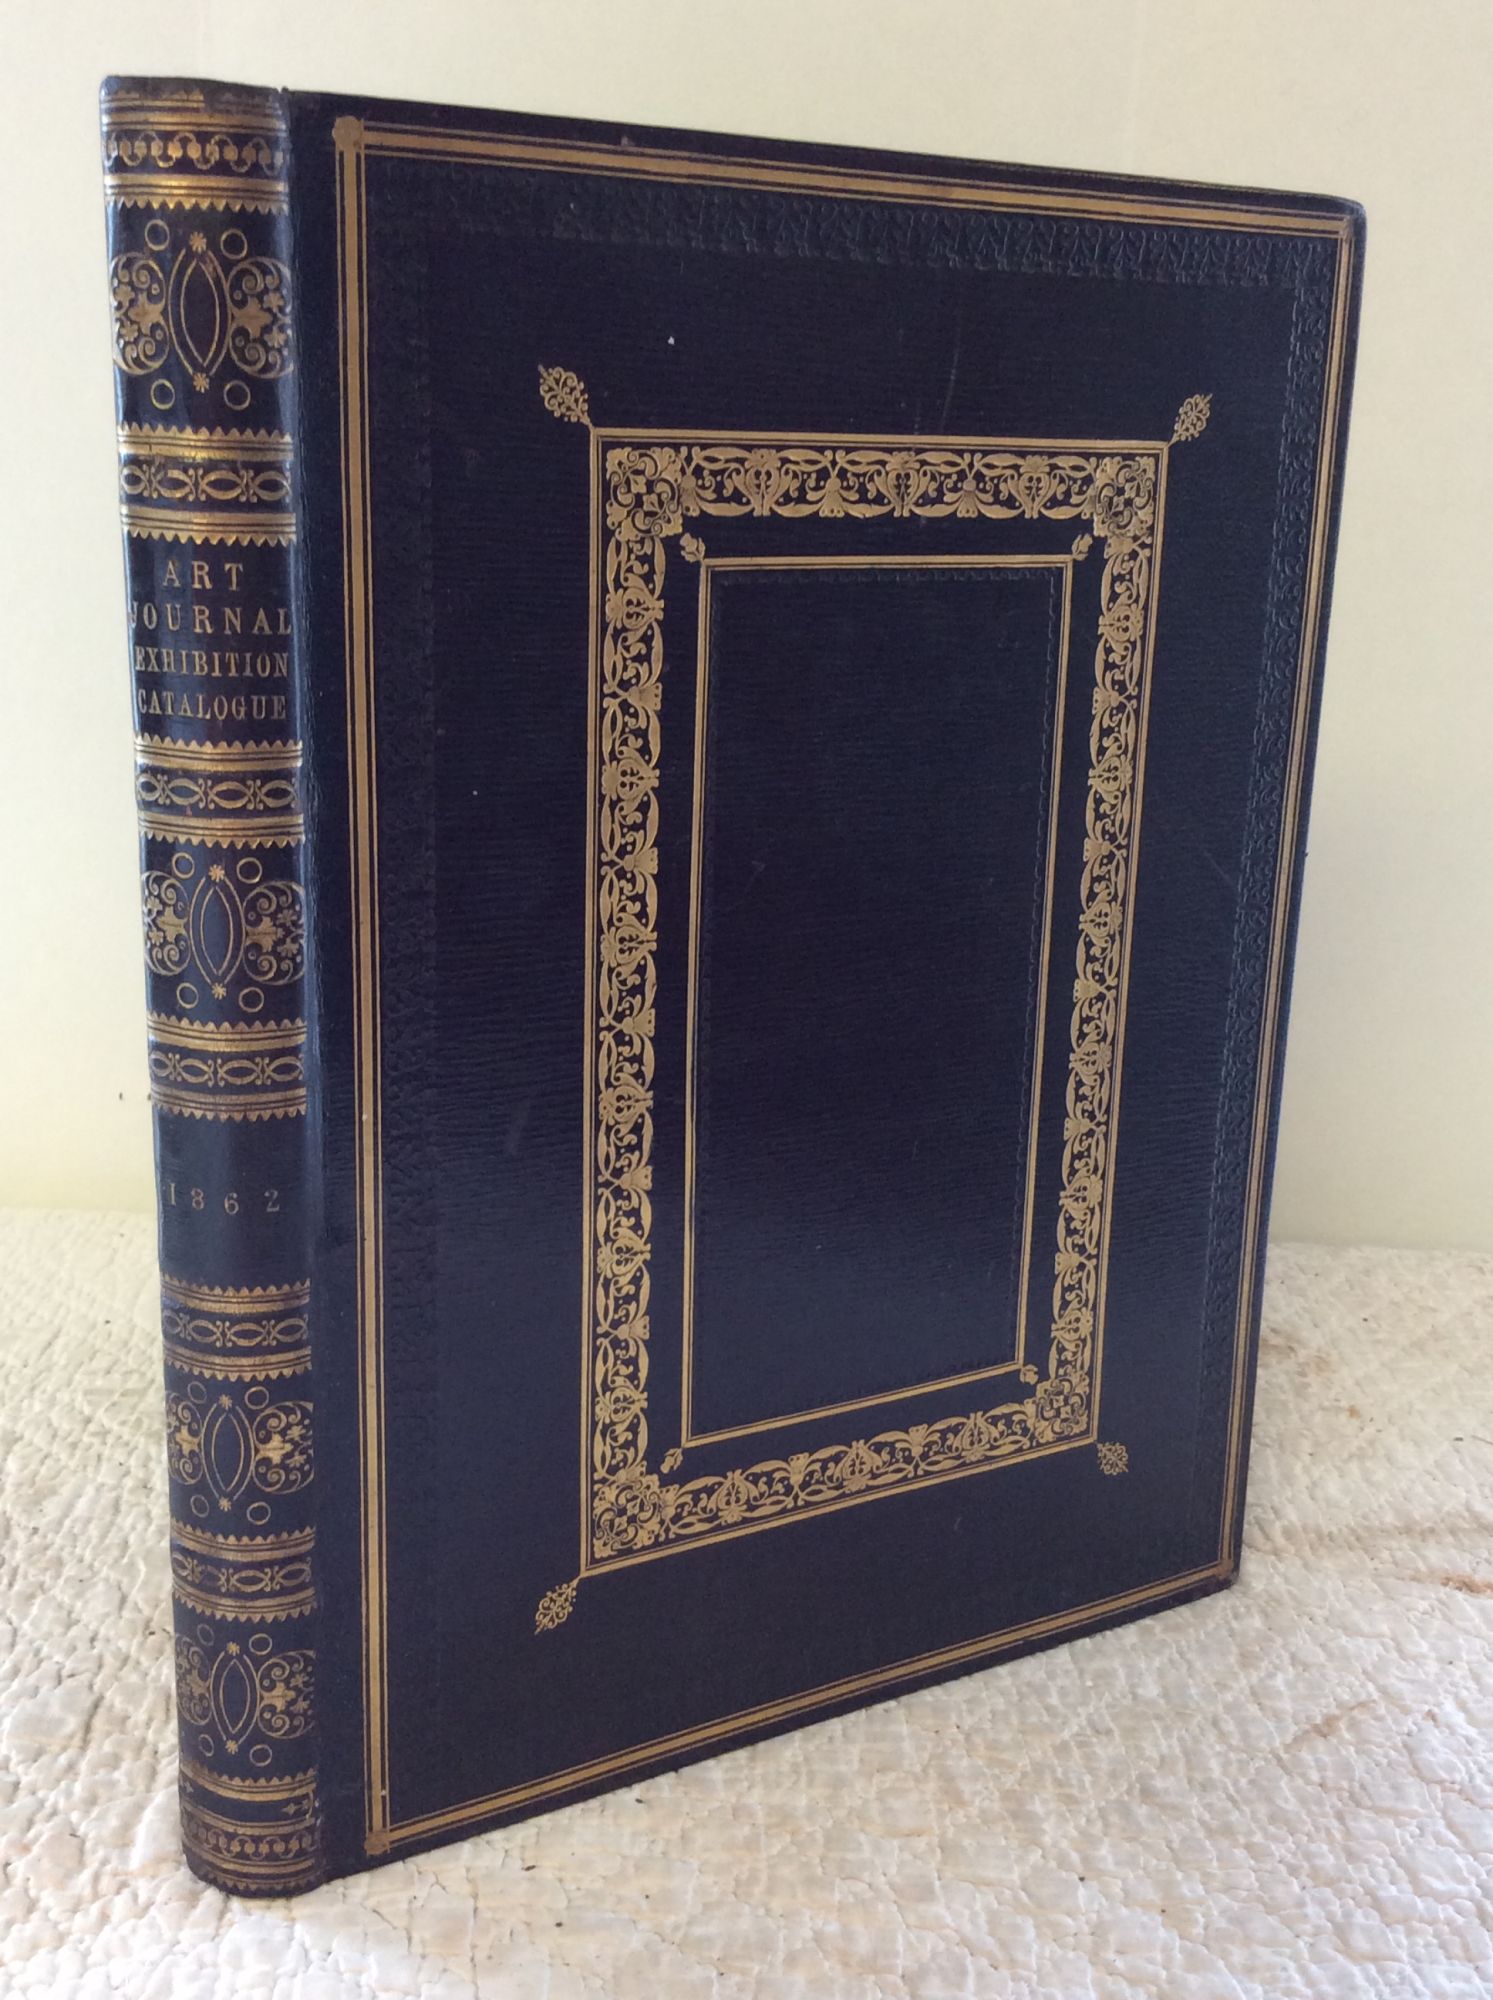  - The Art Journal Illustrated Catalogue of the International Exhibition 1862